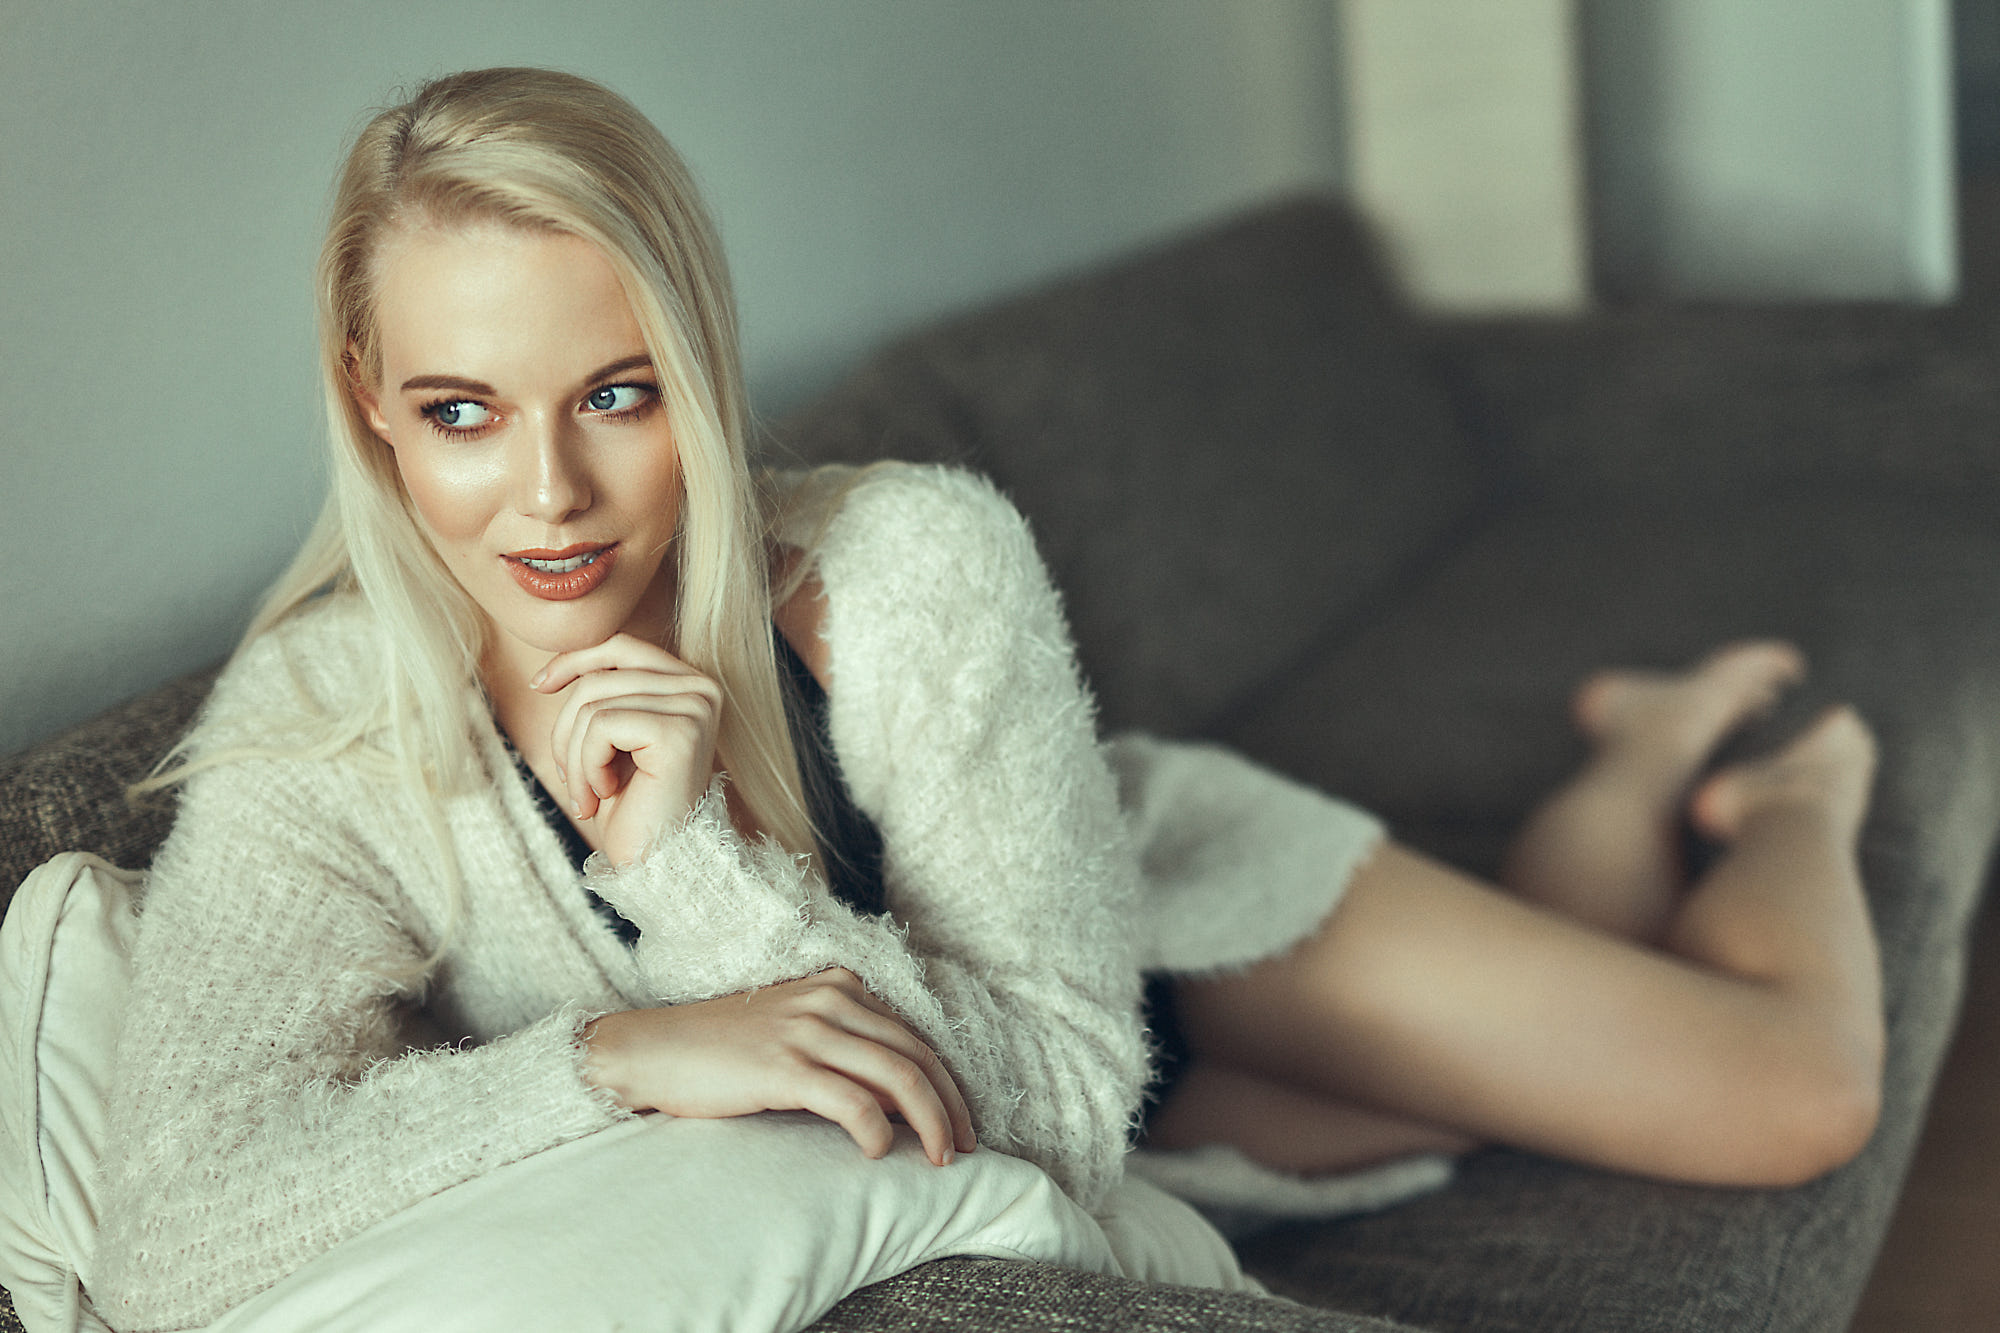 Women Model Blonde Blue Eyes Hand On Face Black Top Cardigan Looking Into The Distance Legs Sitting  2000x1333